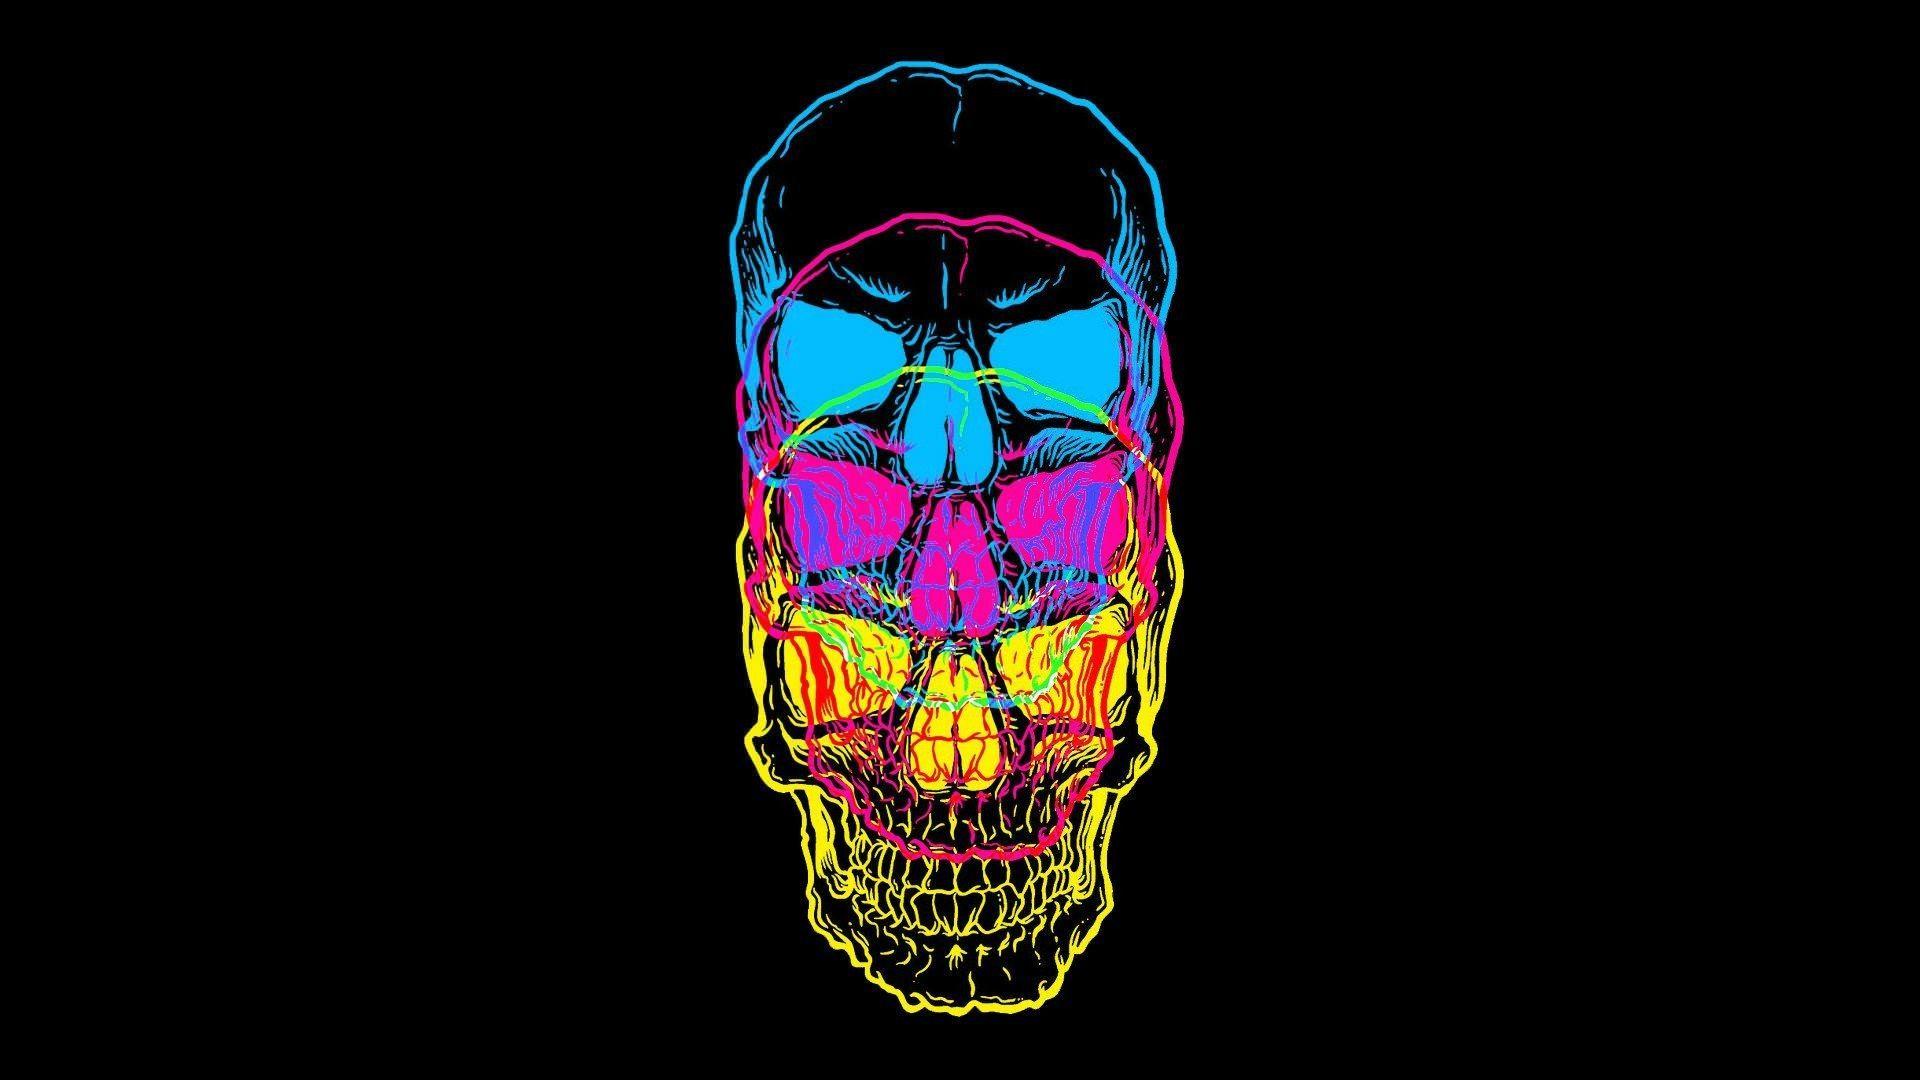 Wallpaper abstract, 3D, colorful, skull, 8k, Abstract #21287